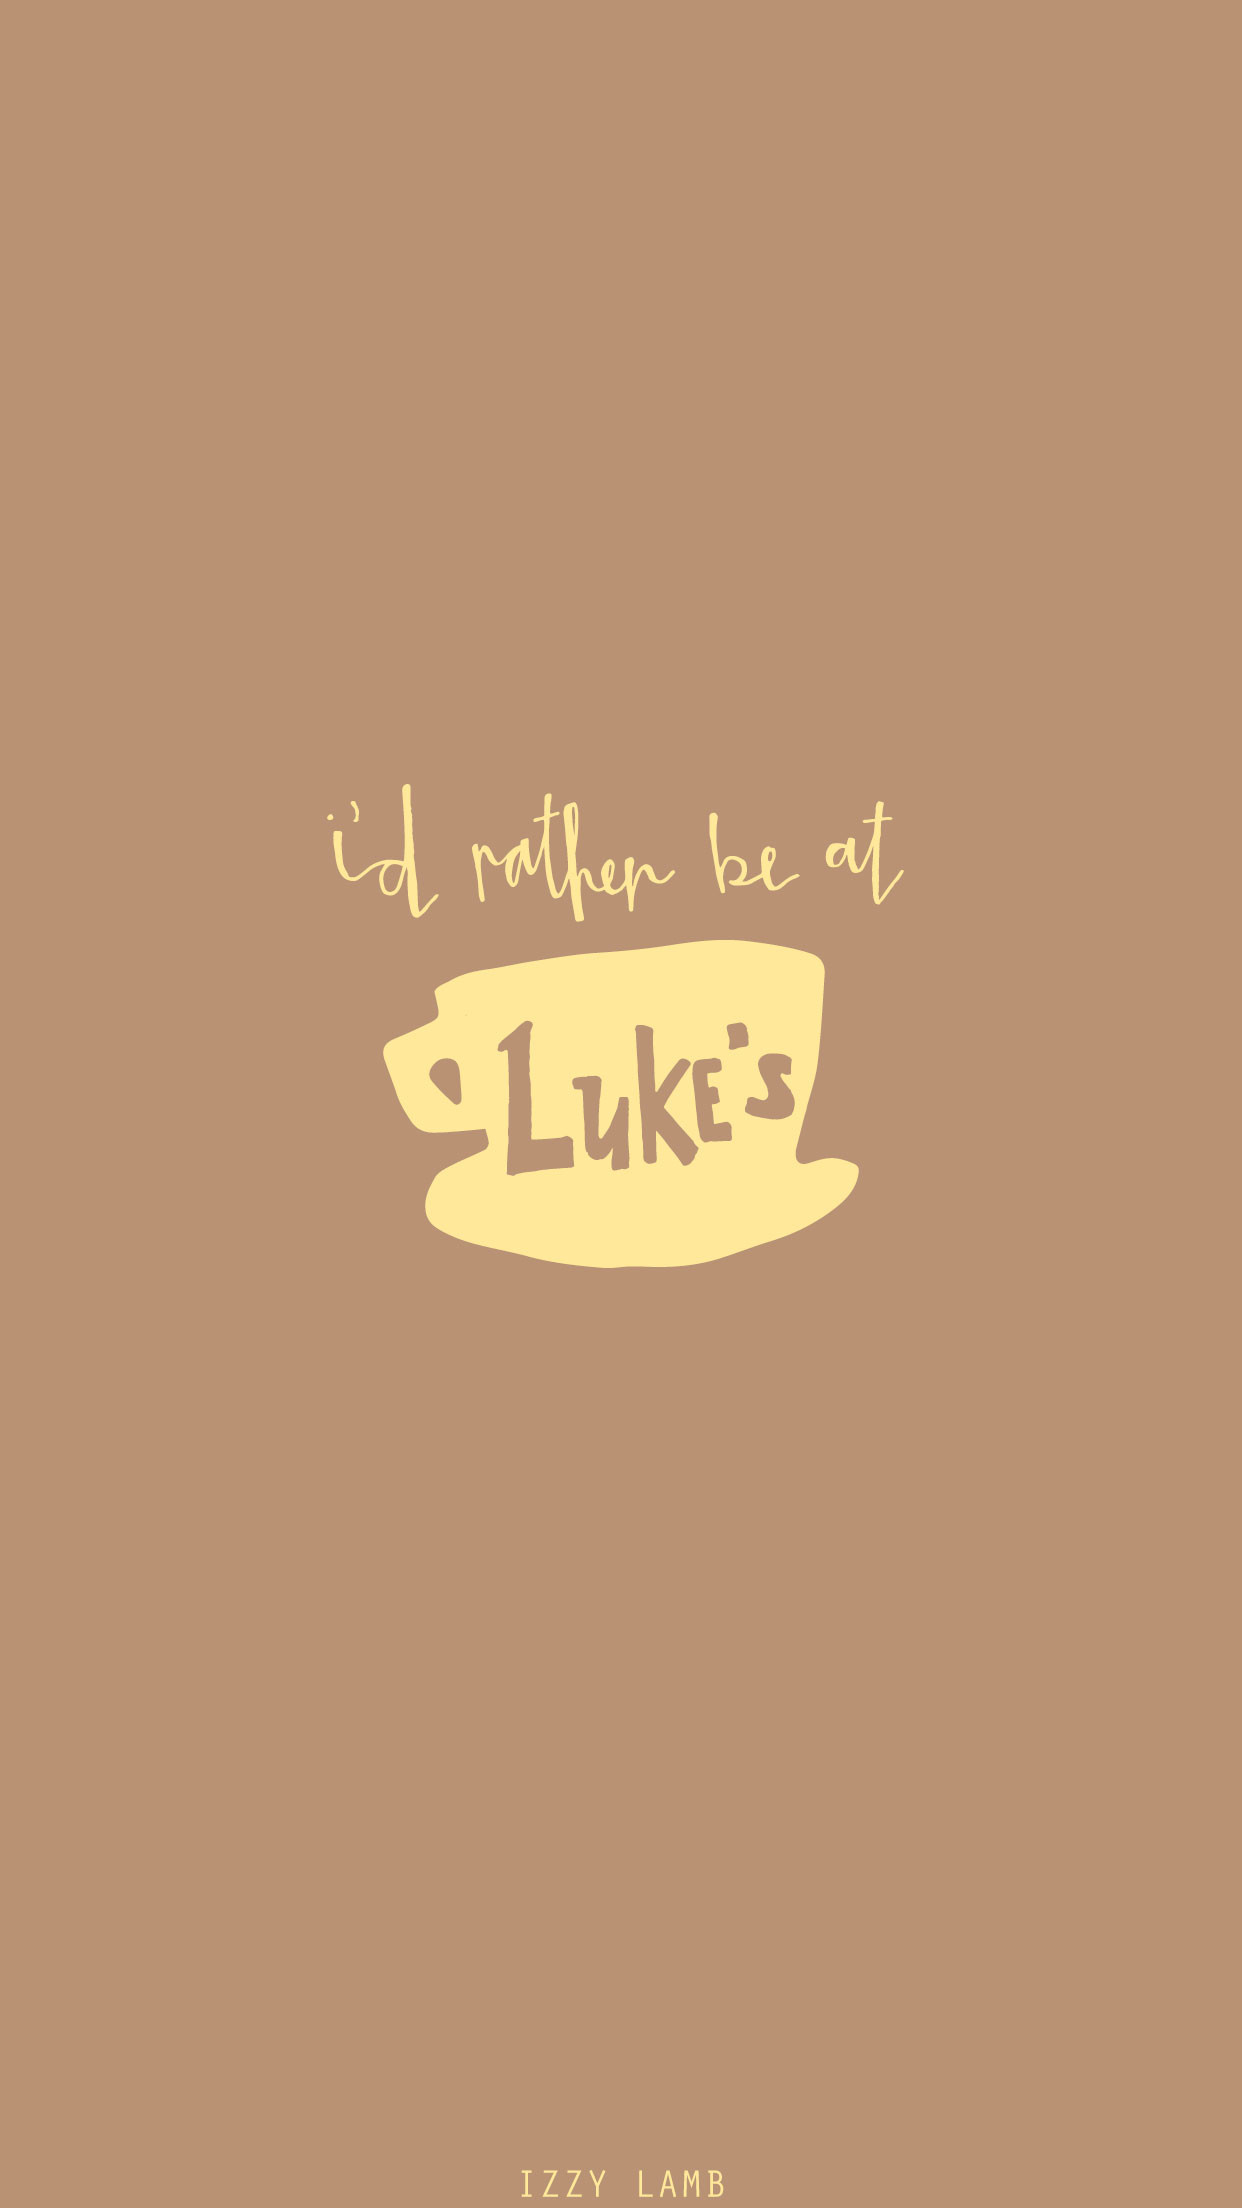 This is a cute "Luke's Diner" smartphone wallpaper.